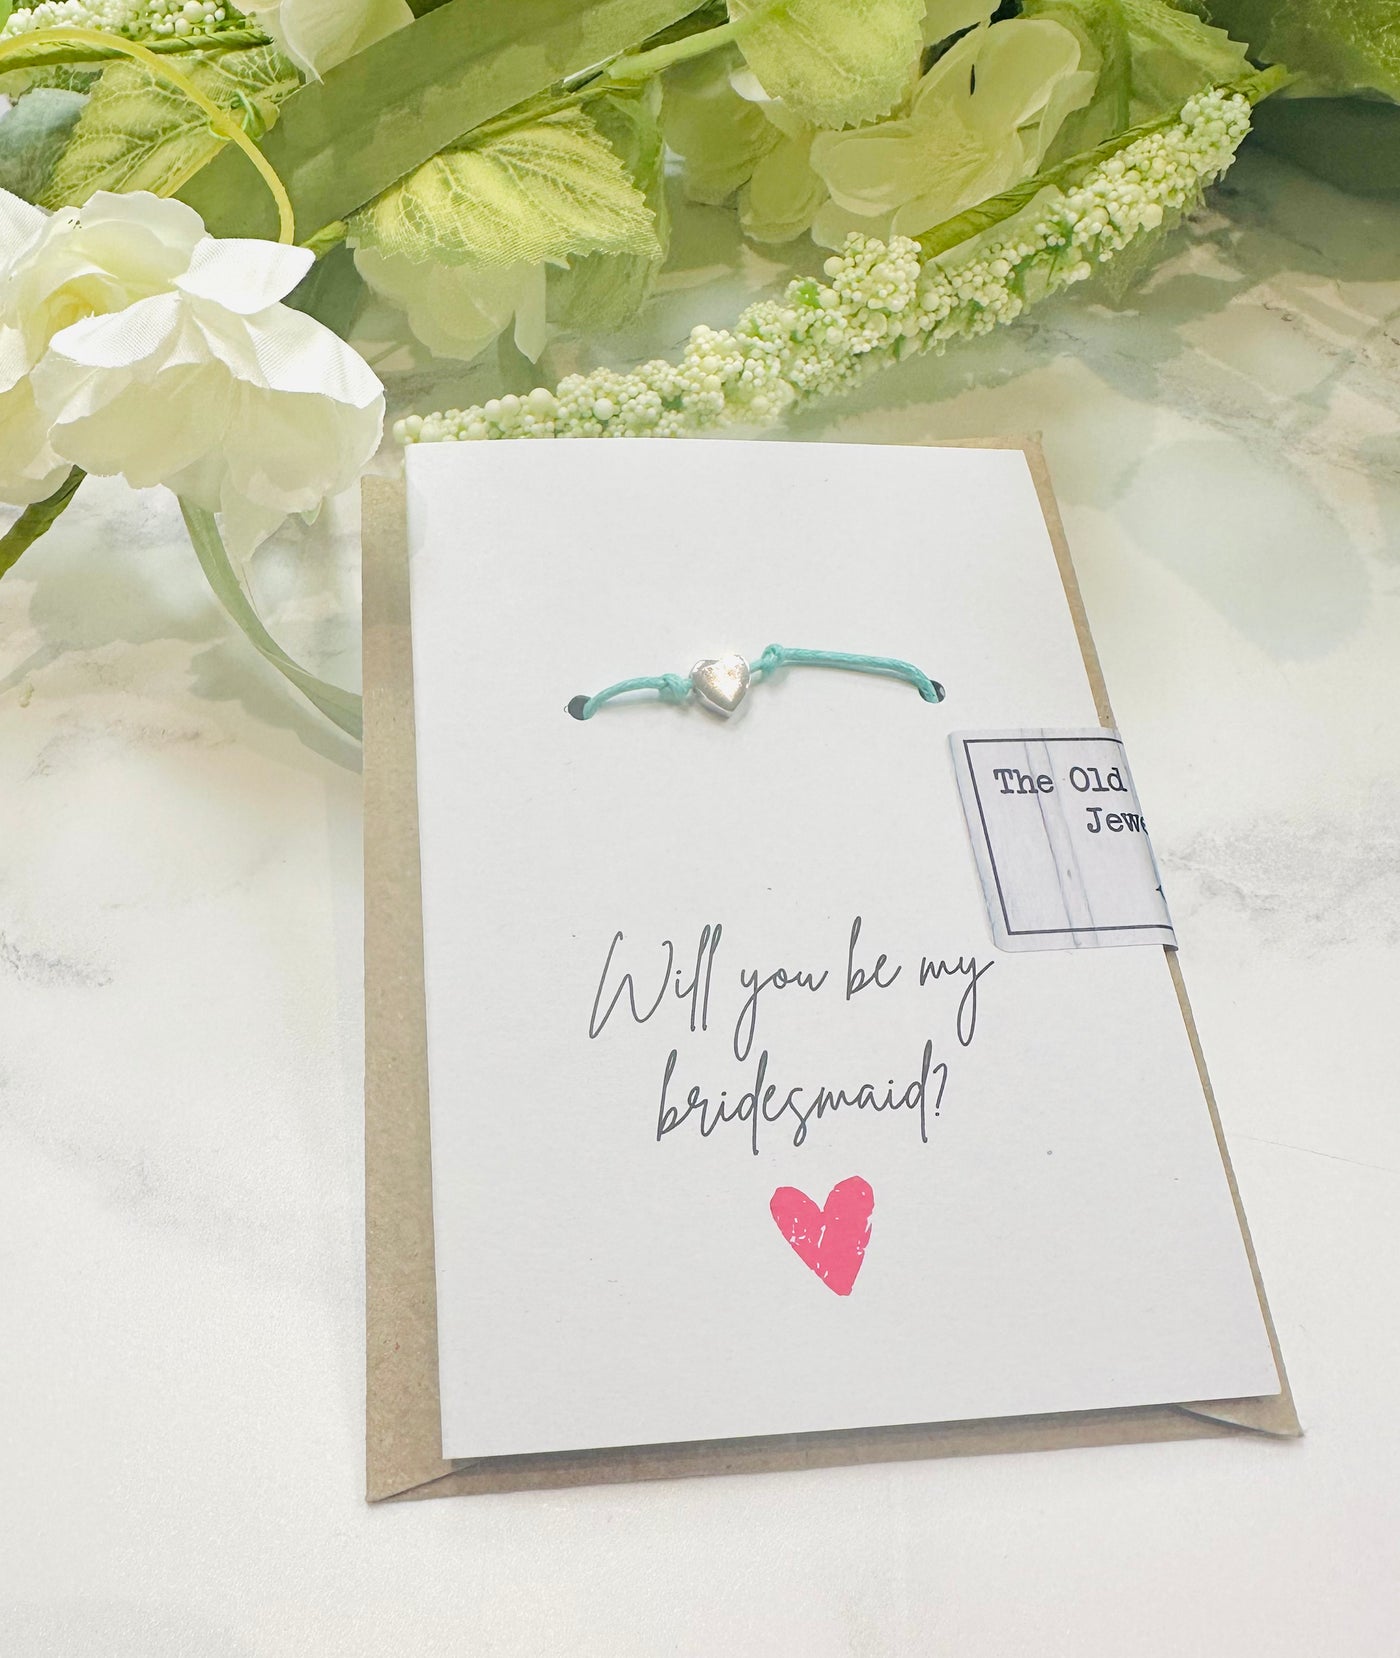 Will You Be My Bridesmaid? - Heart Turquoise Cord Wish Bracelet